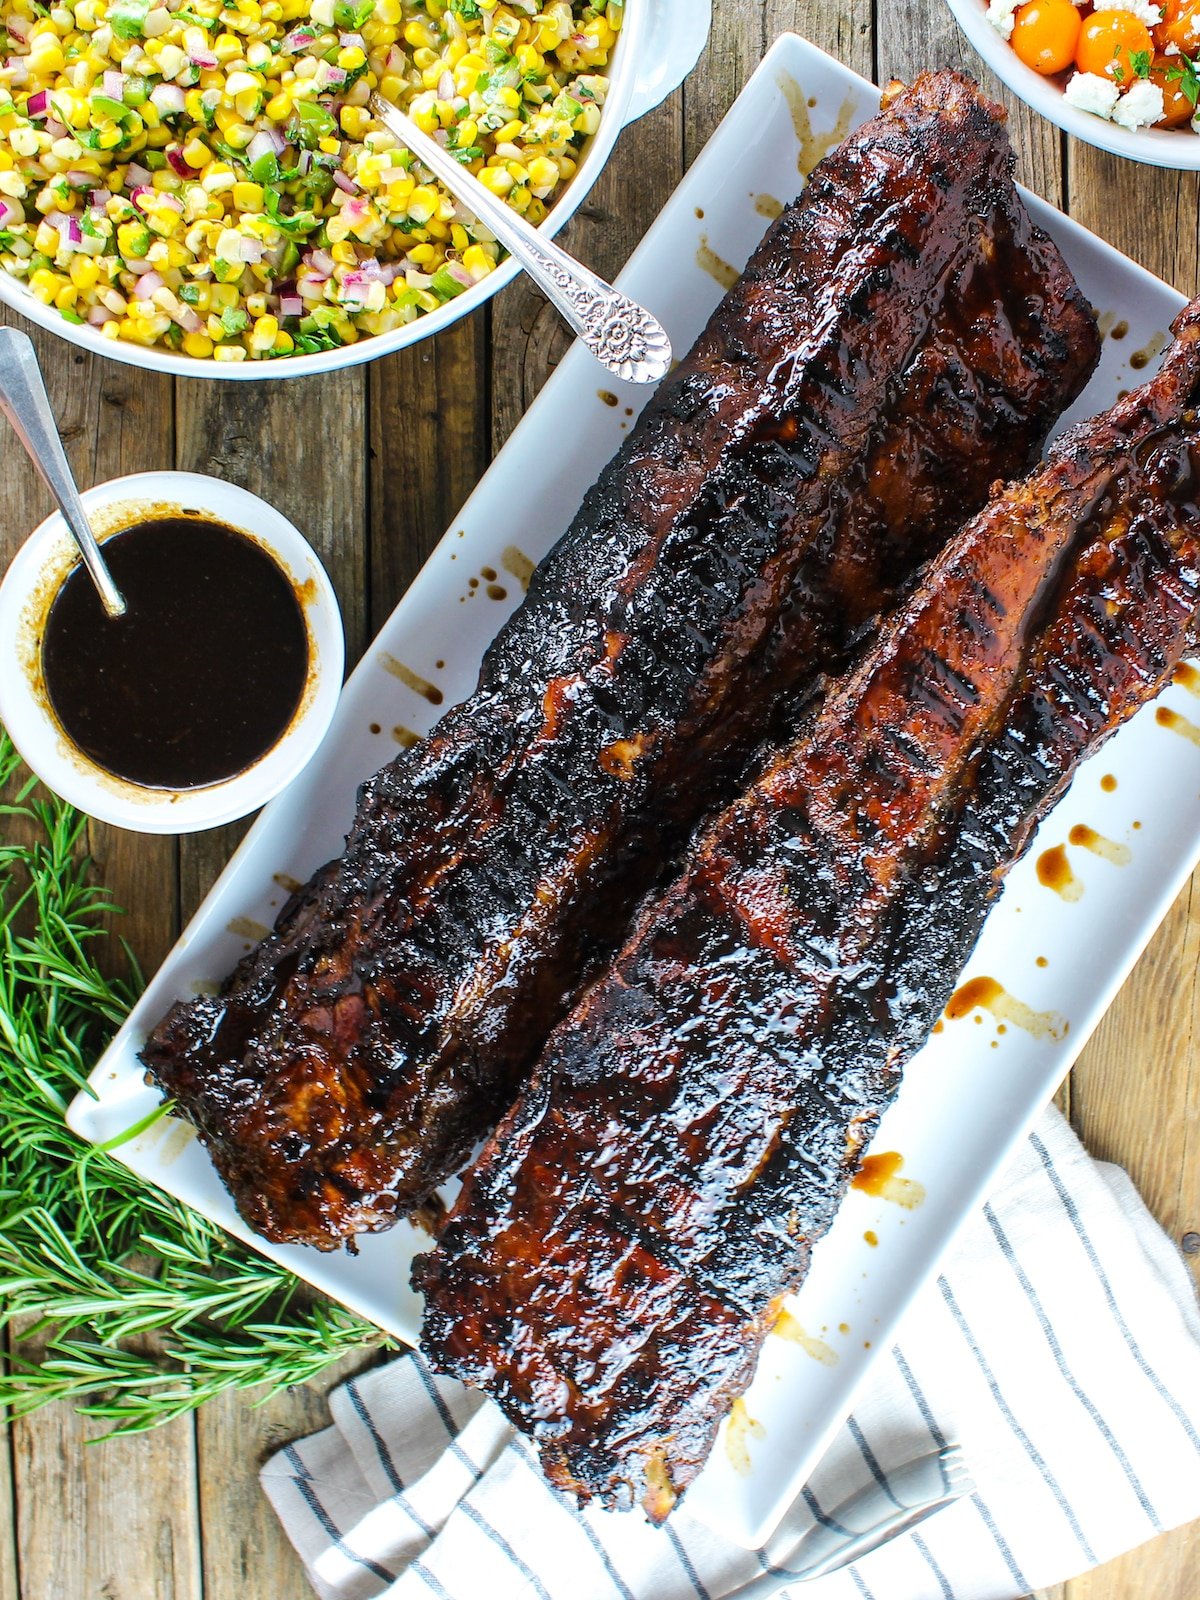 Two racks of glazed sticky Balsamic Baby Back Ribs and salad on the side.